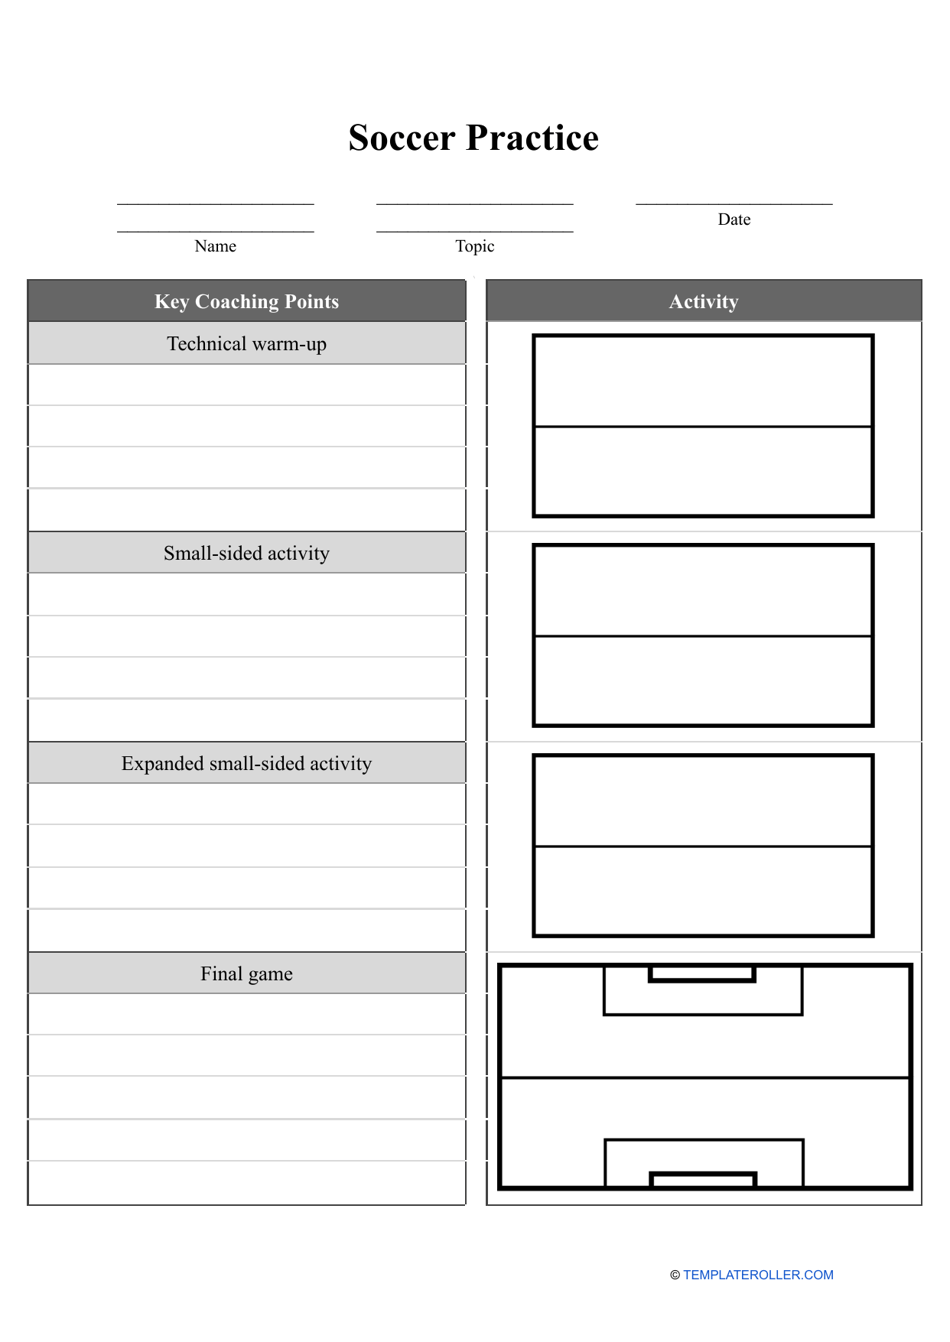 Soccer Practice Template Preview - Trendy Design for Effectively Structuring Practicing Sessions